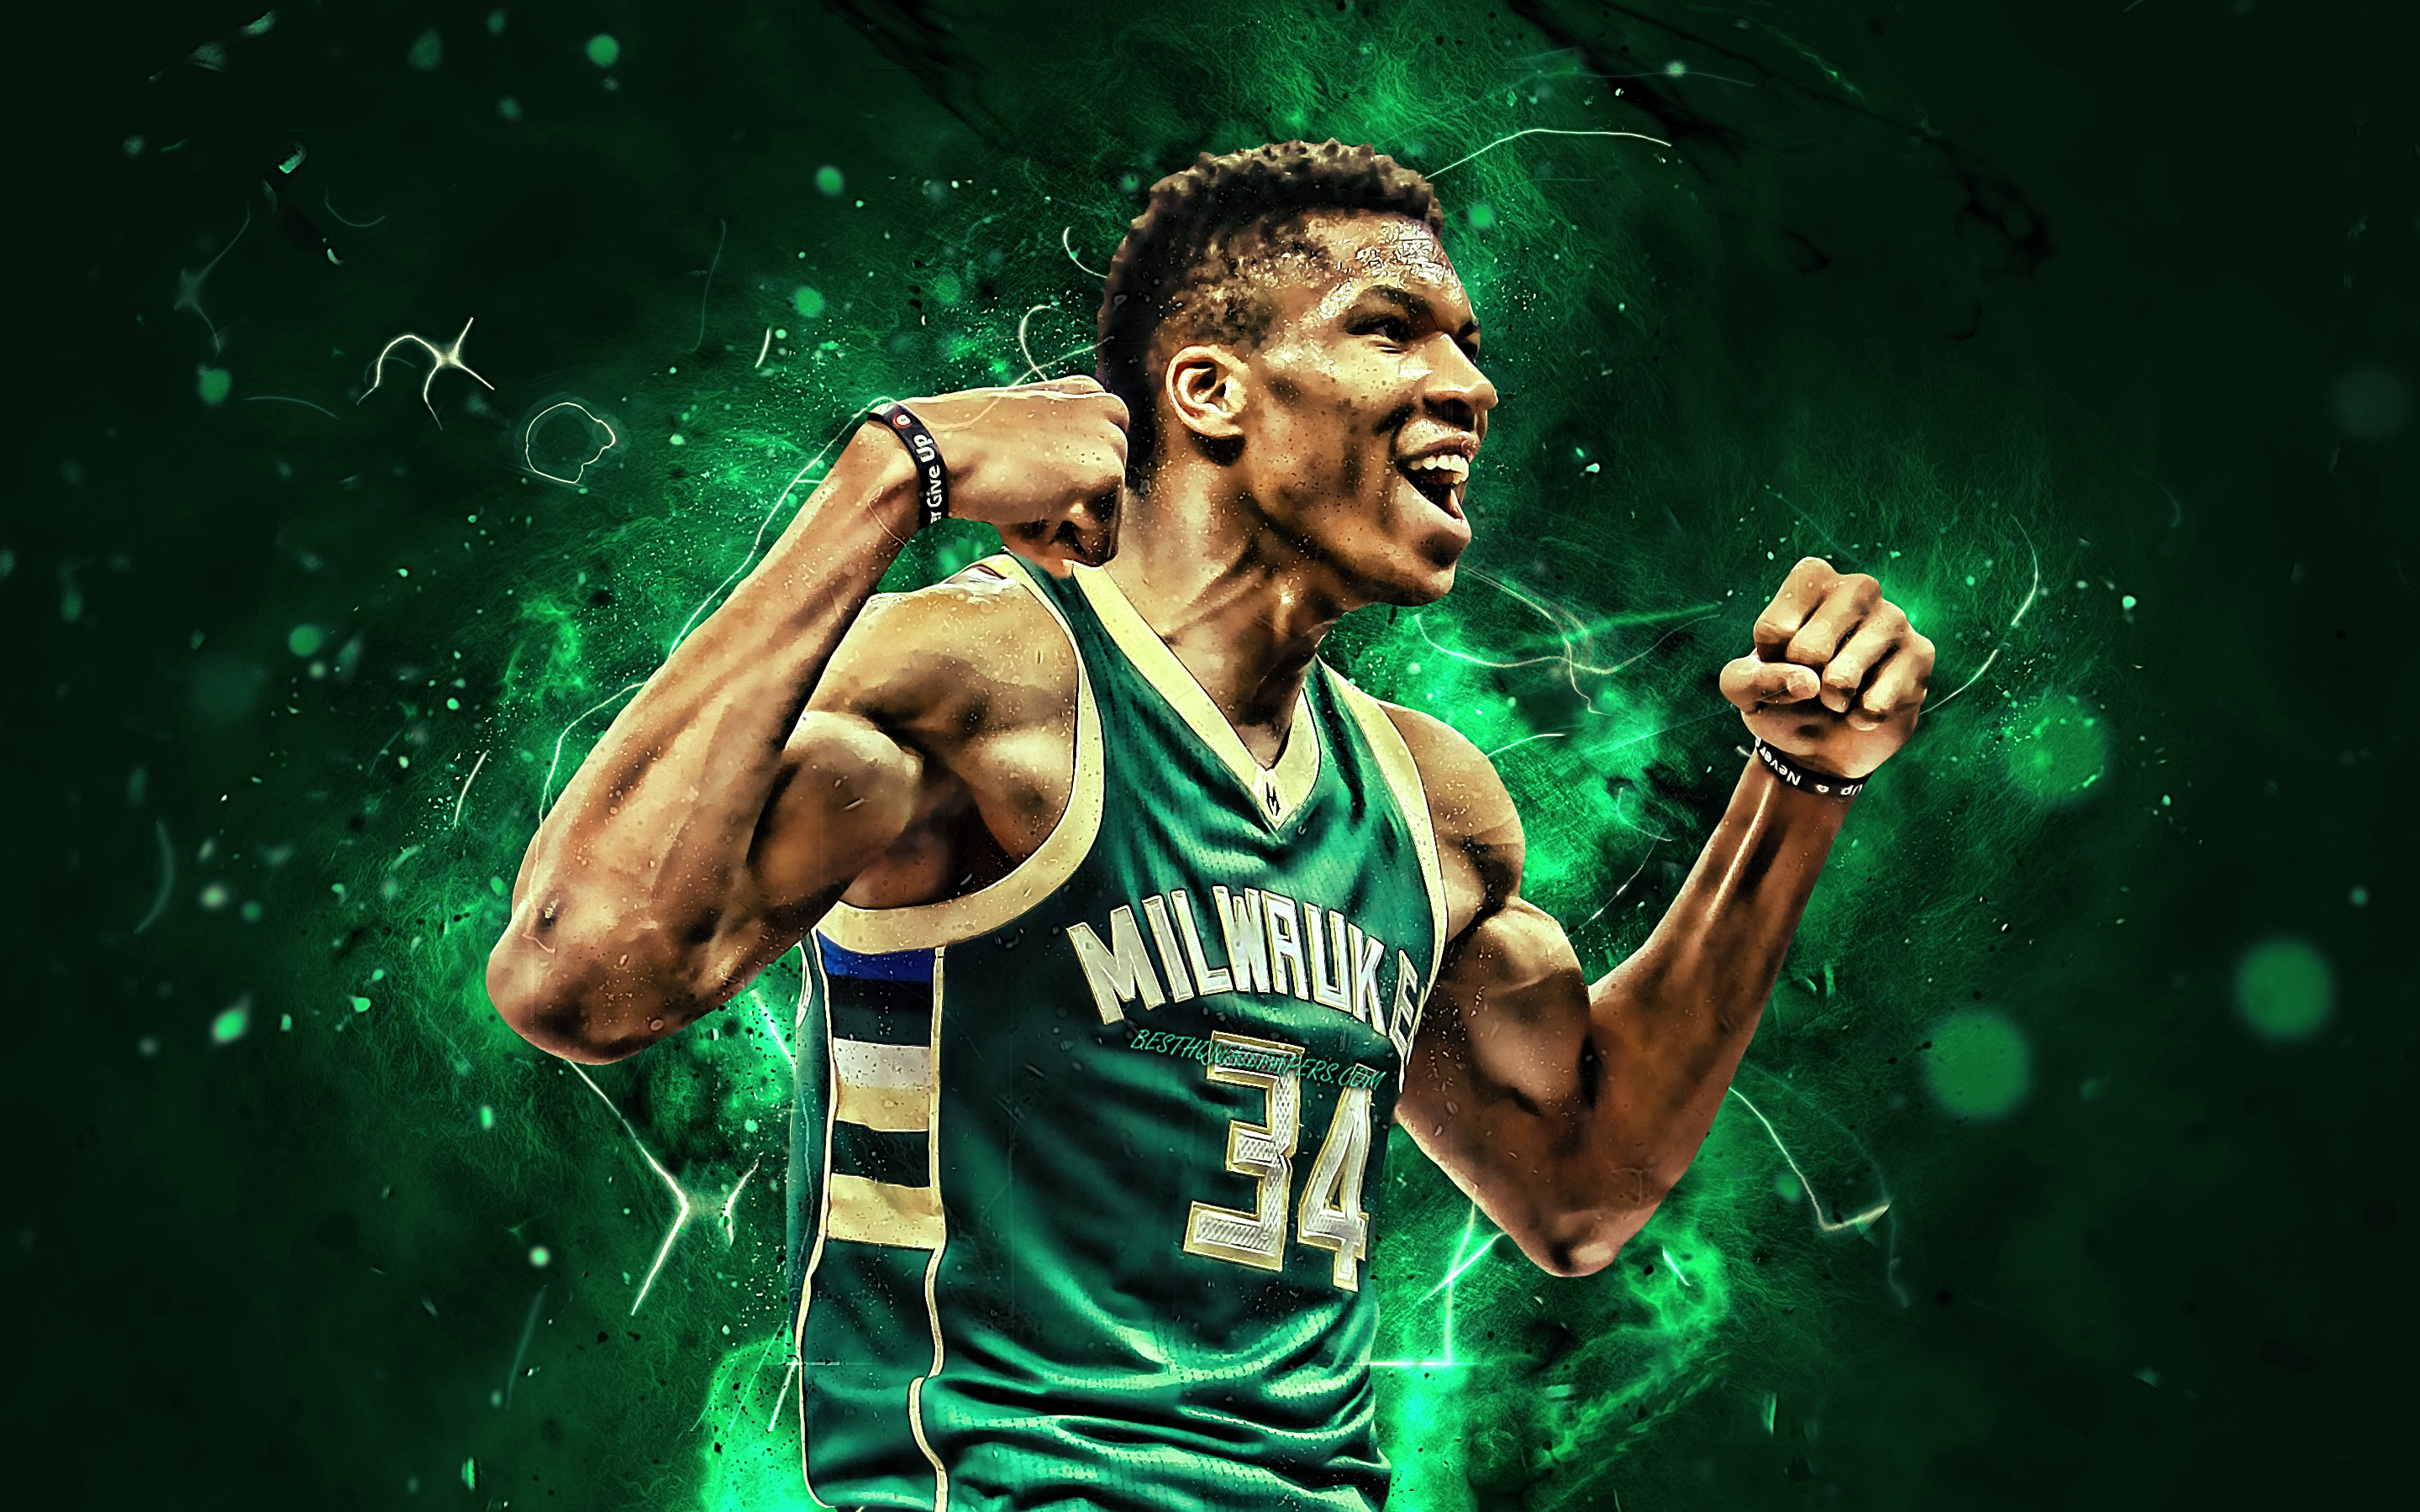 Free download Download wallpapers Giannis Antetokounmpo basketball